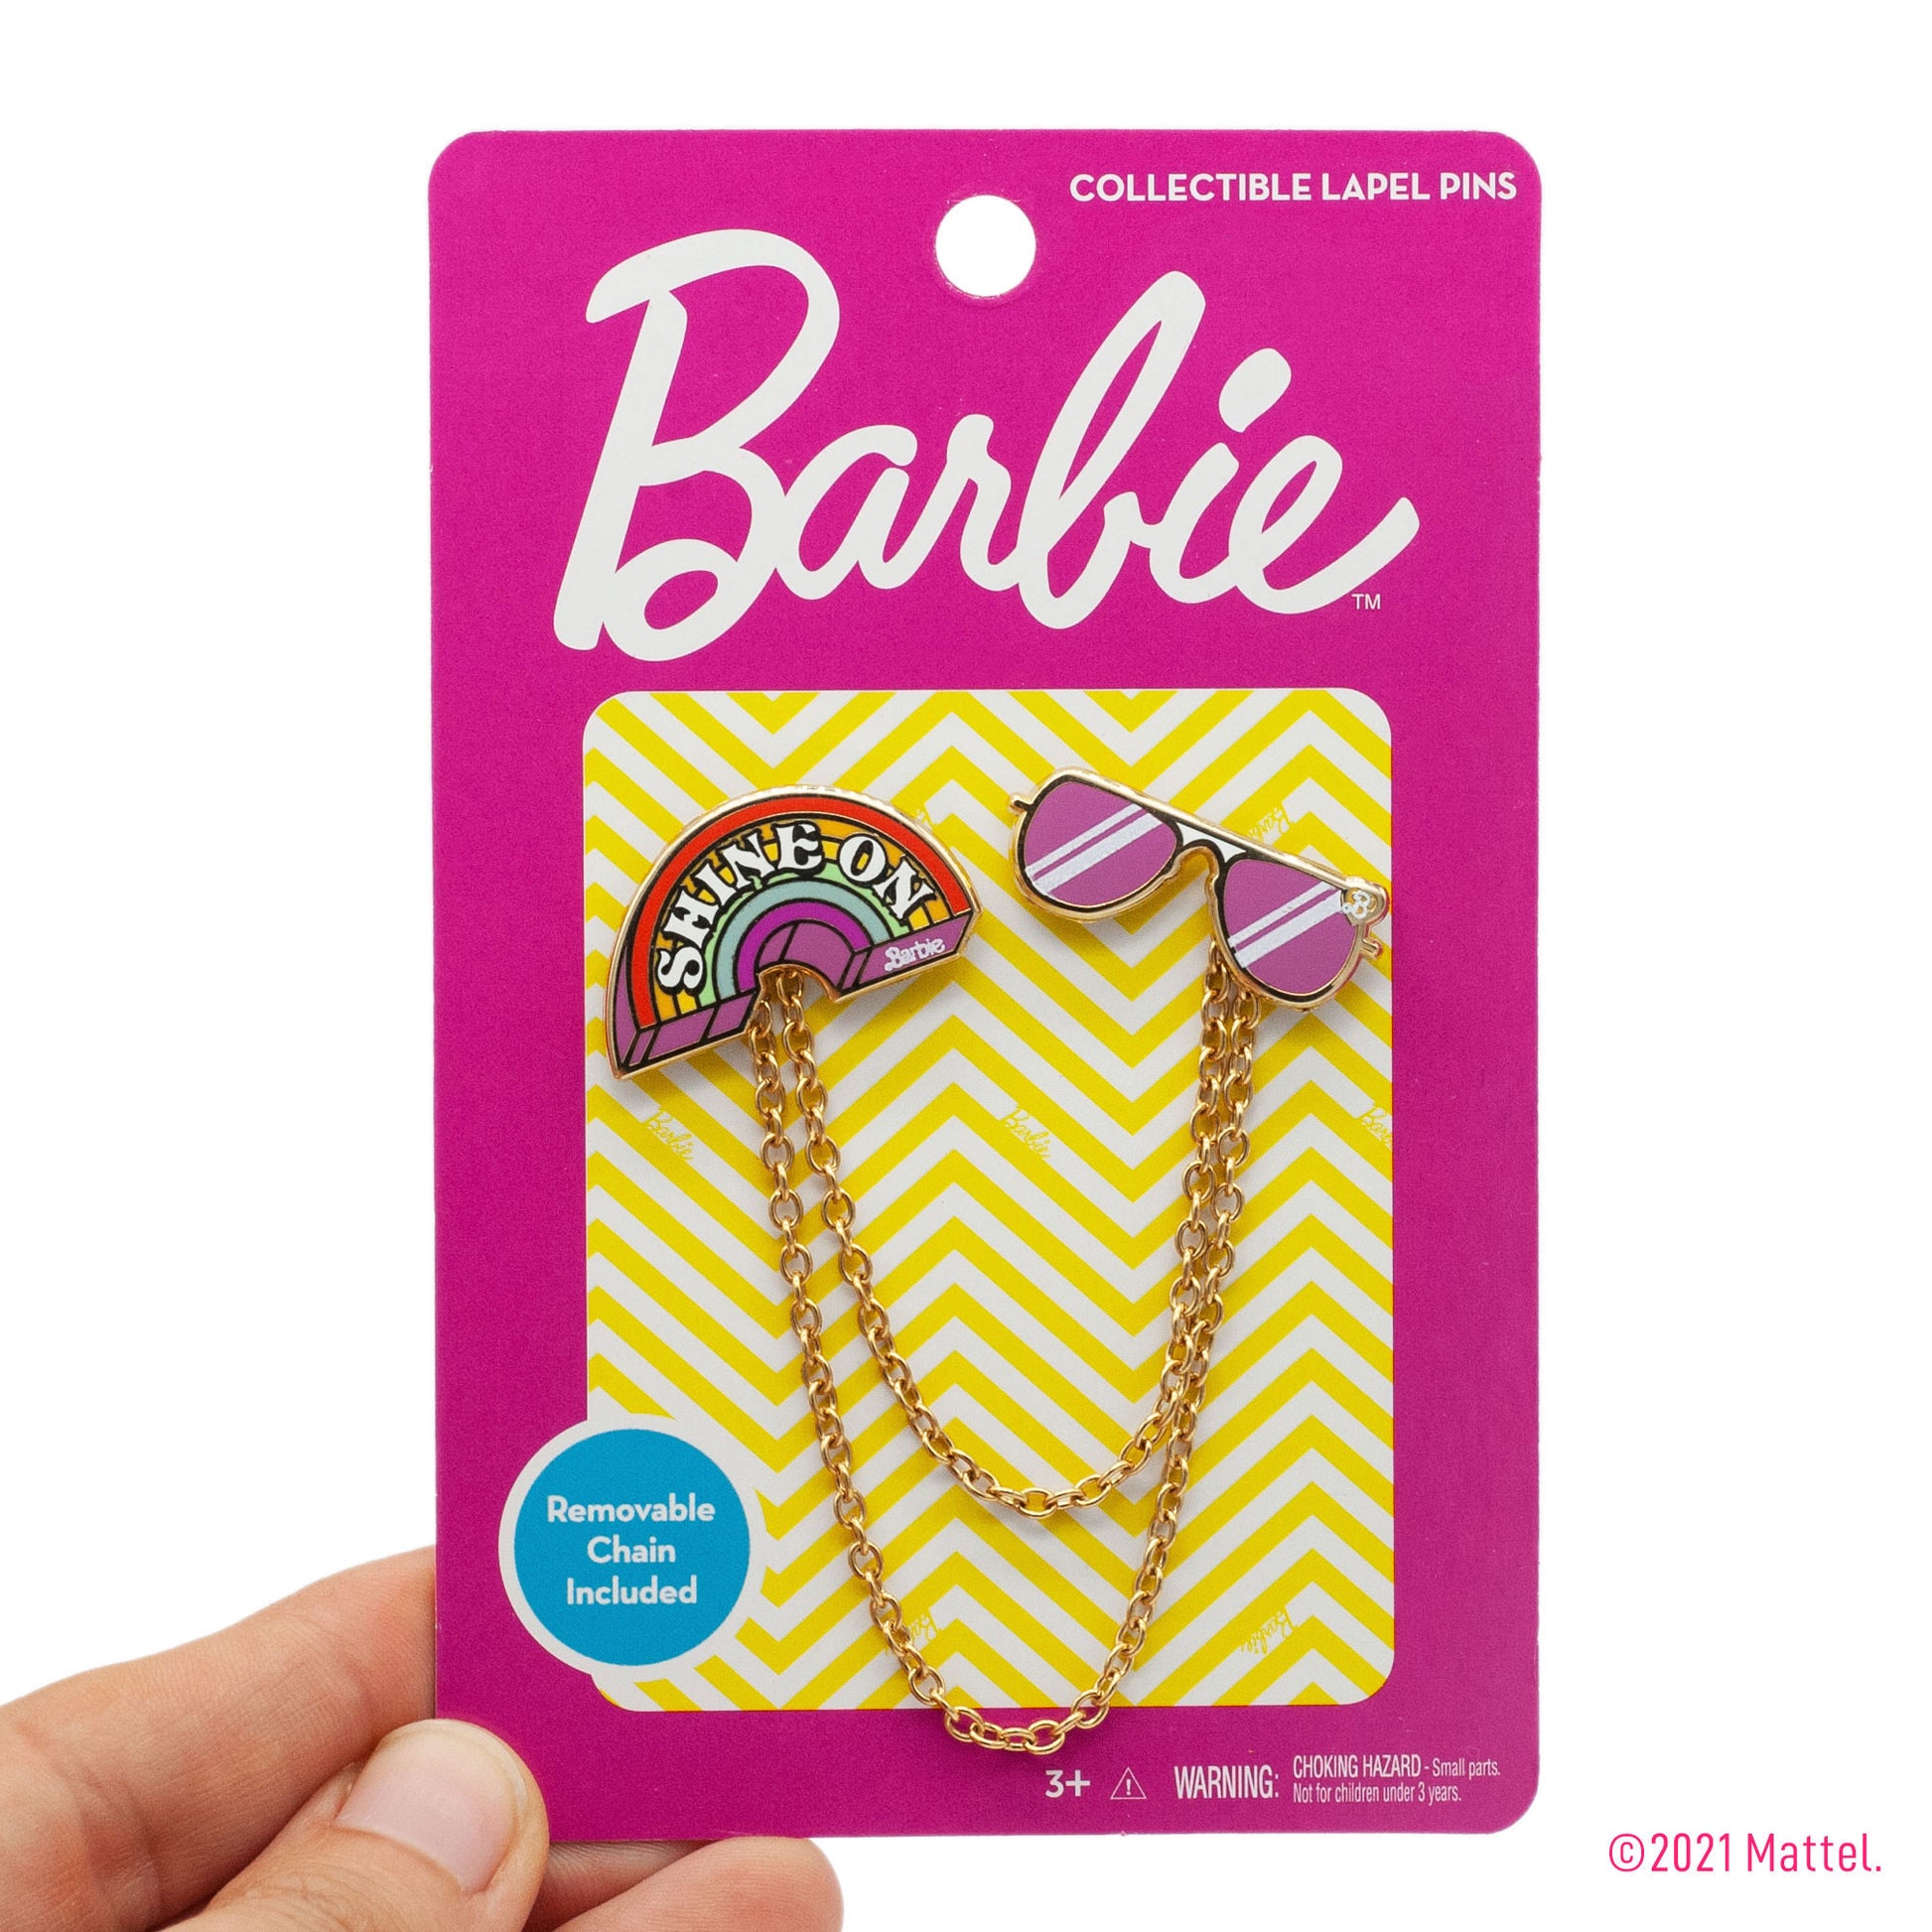 Barbie™ Shine On and Sunglasses Pins with Removable Chains on pink packaging card.